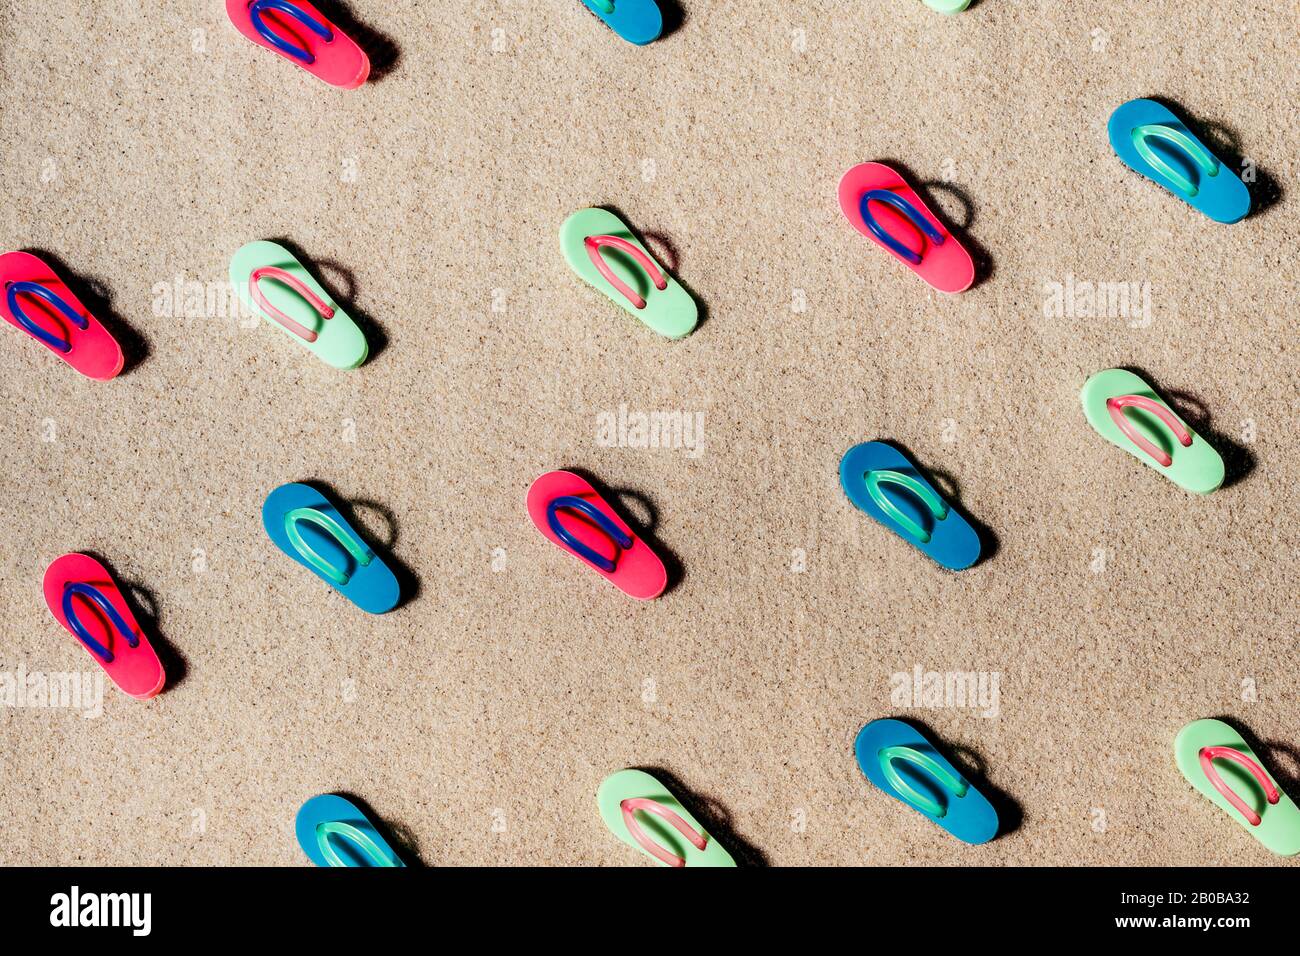 Pattern of beach colorful sandals or thongs on a sandy beach Stock ...